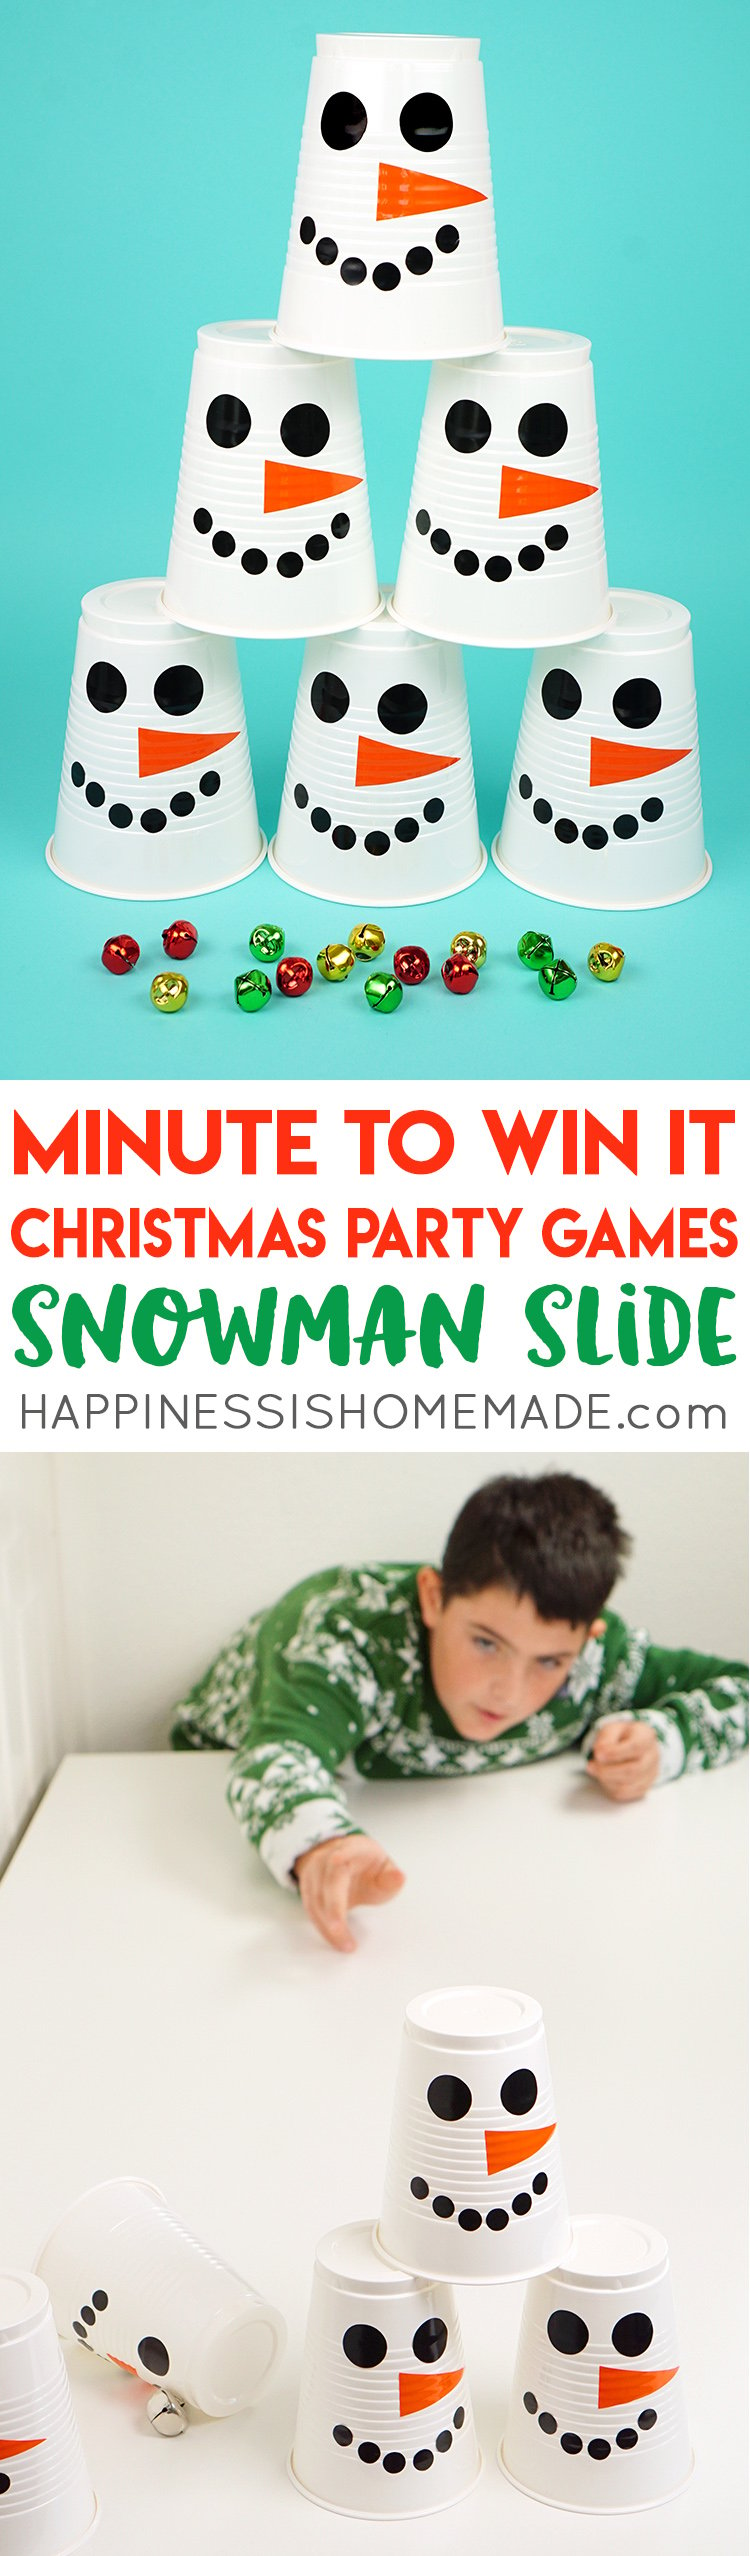 minute to win it christmas party game snowman slide